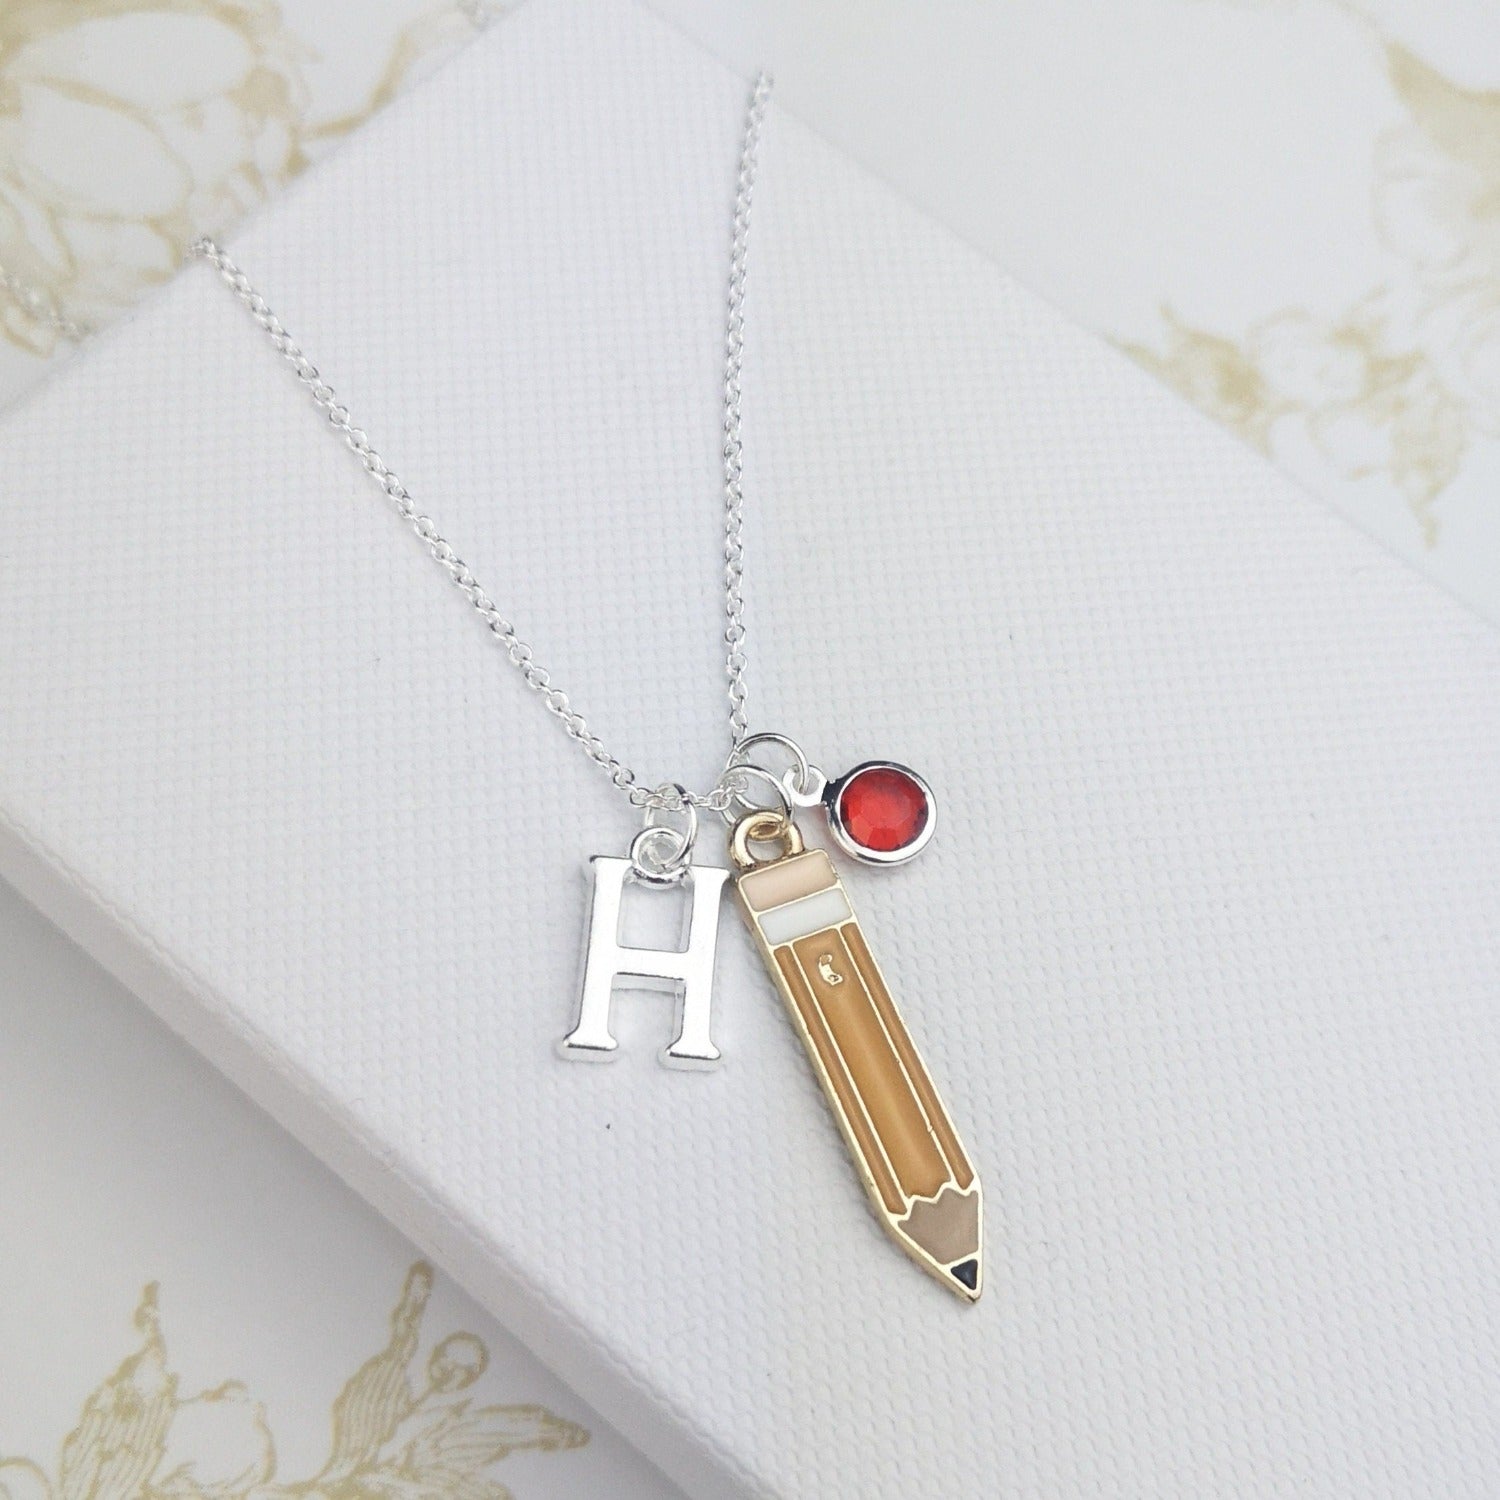 Personalised sterling silver necklace with an enamel pencil